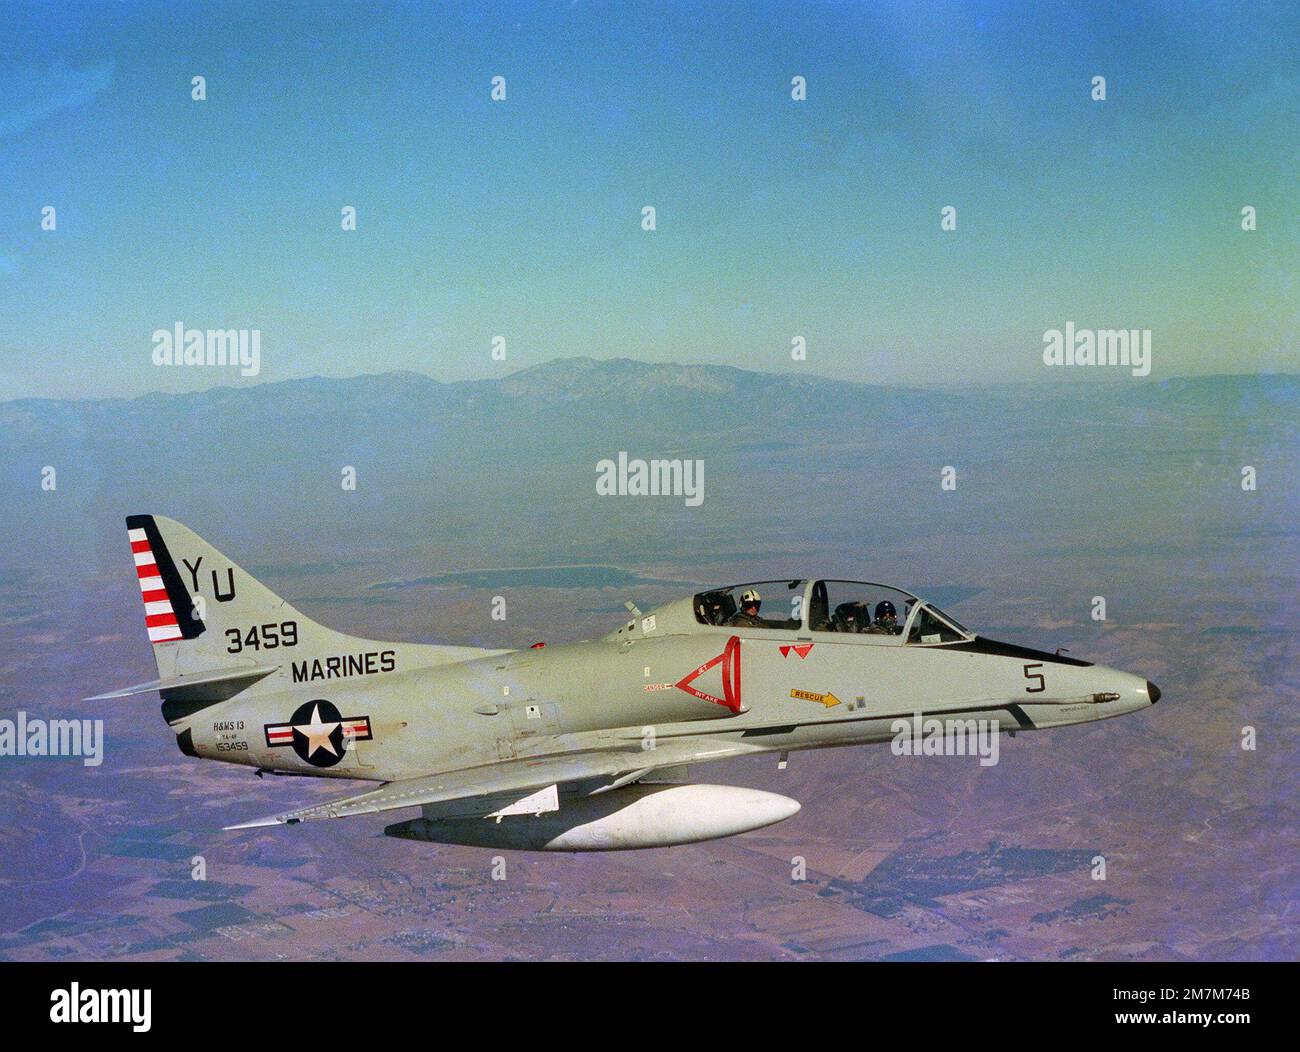 An air-to-air right side view of a TA-4F Skyhawk aircraft from Headquarters and Maintenance Squadron 13 (H&MS-13). (Substandard image). State: California (CA) Country: United States Of America (USA) Stock Photo